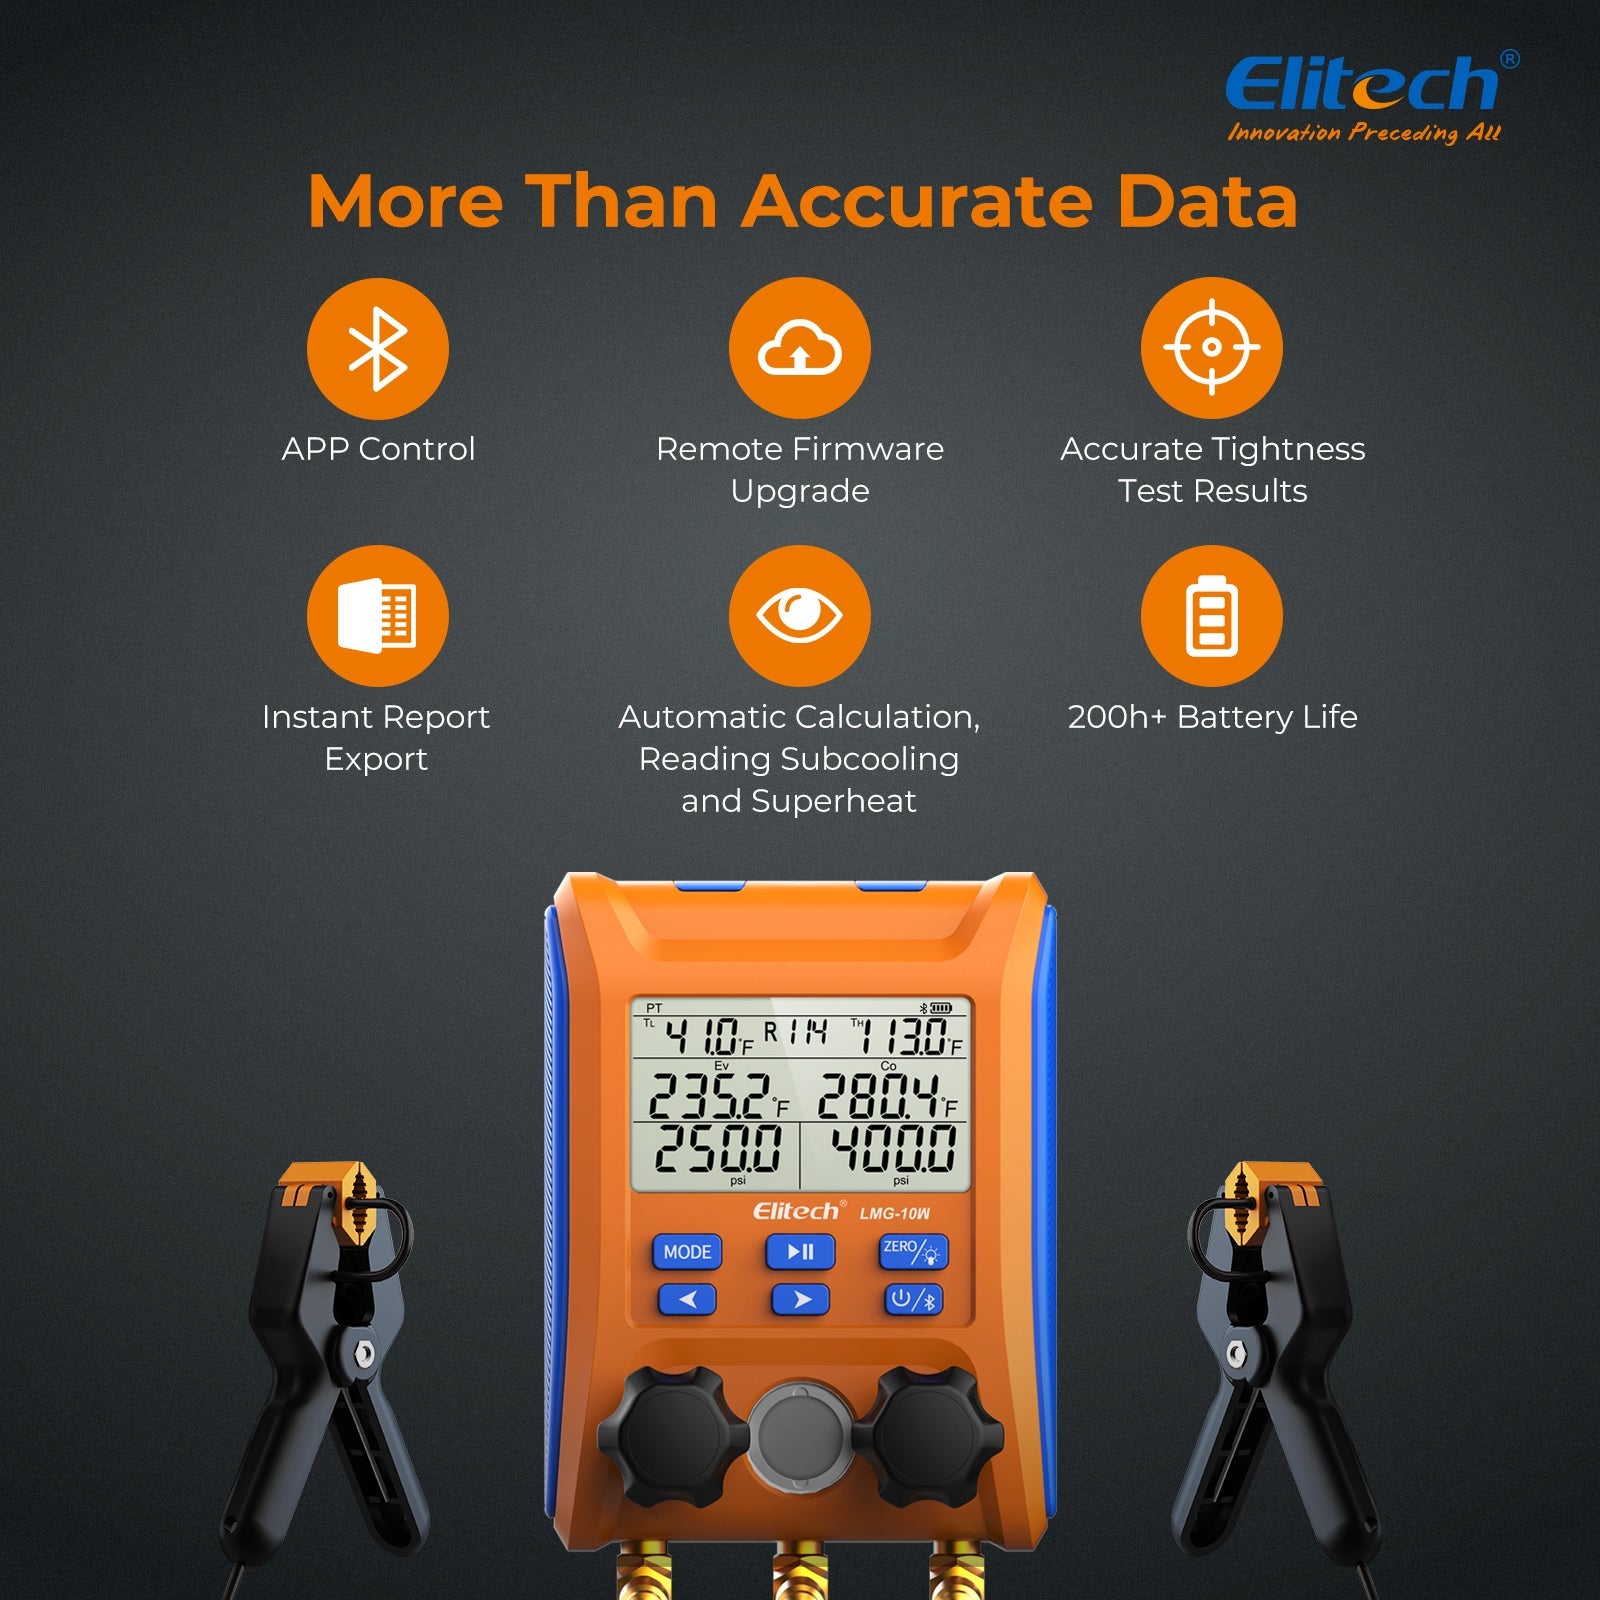 Elitech Digital Manifold Gauge 2-way Valve AC Gauges App Control with Thermometer Clamps for HVAC Systems, LMG-10W - Elitech Technology, Inc.